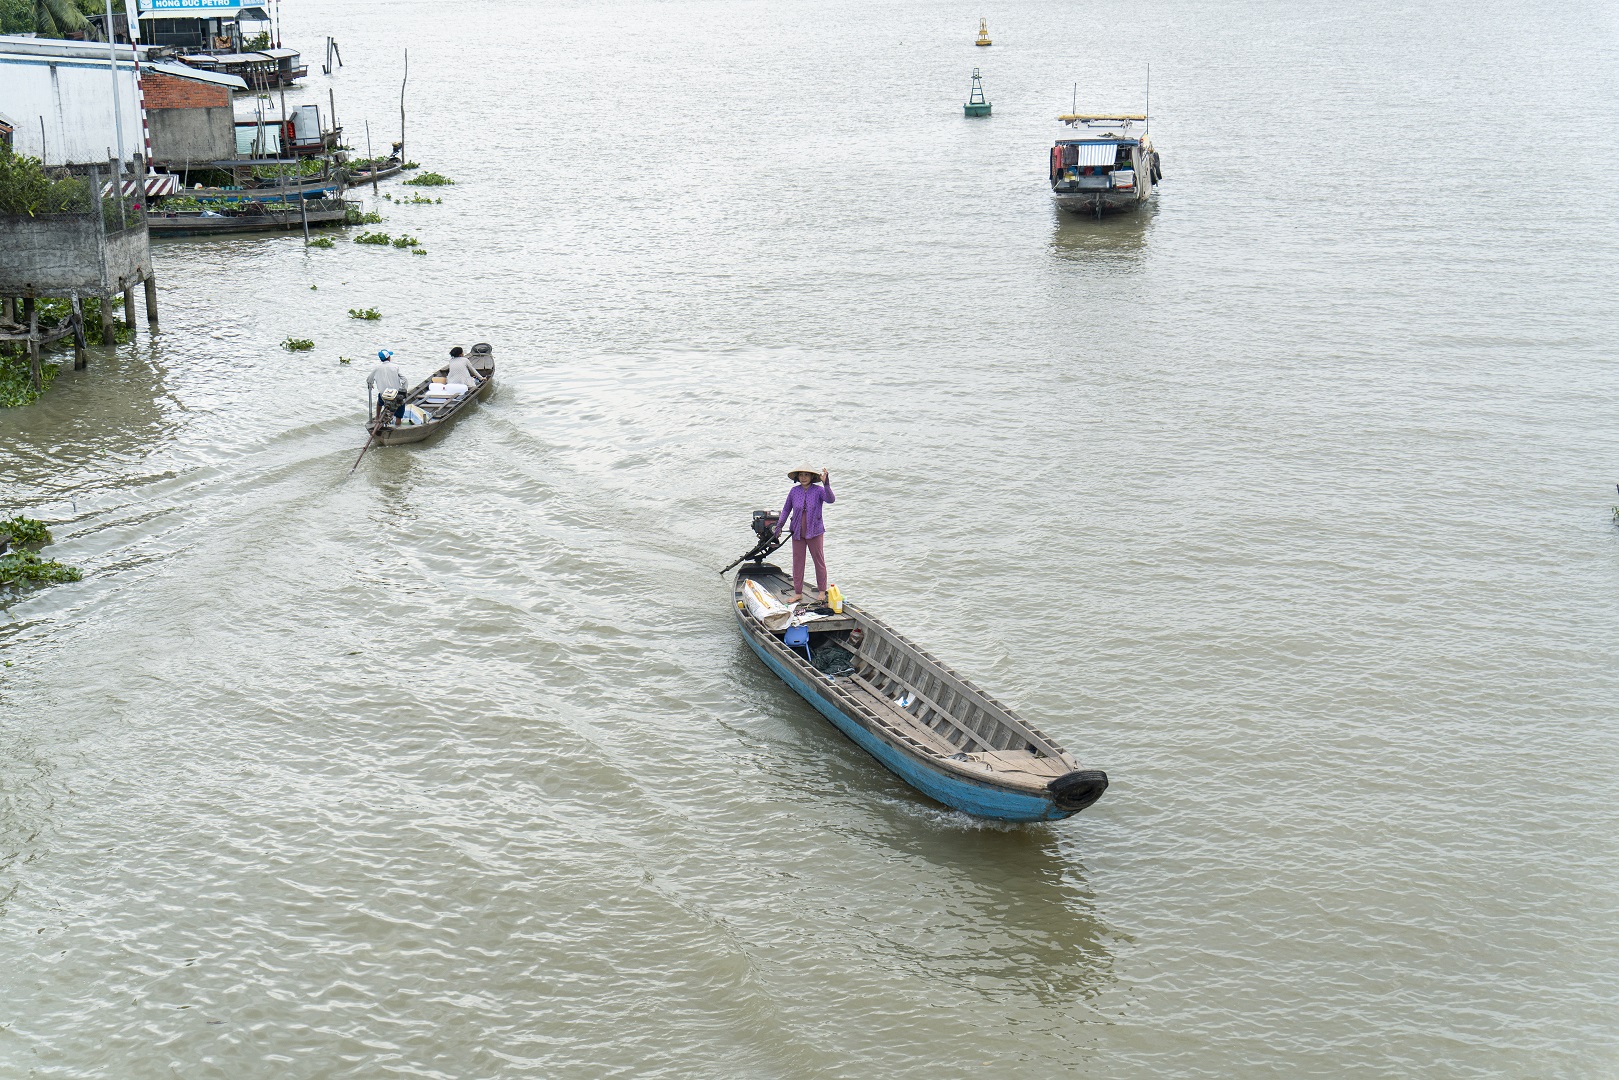 Boats with different sizes and shapes travel on the Tien River in Tien Giang province, Vietnam. Photo: Nguyen Trung Au / Tuoi Tre News